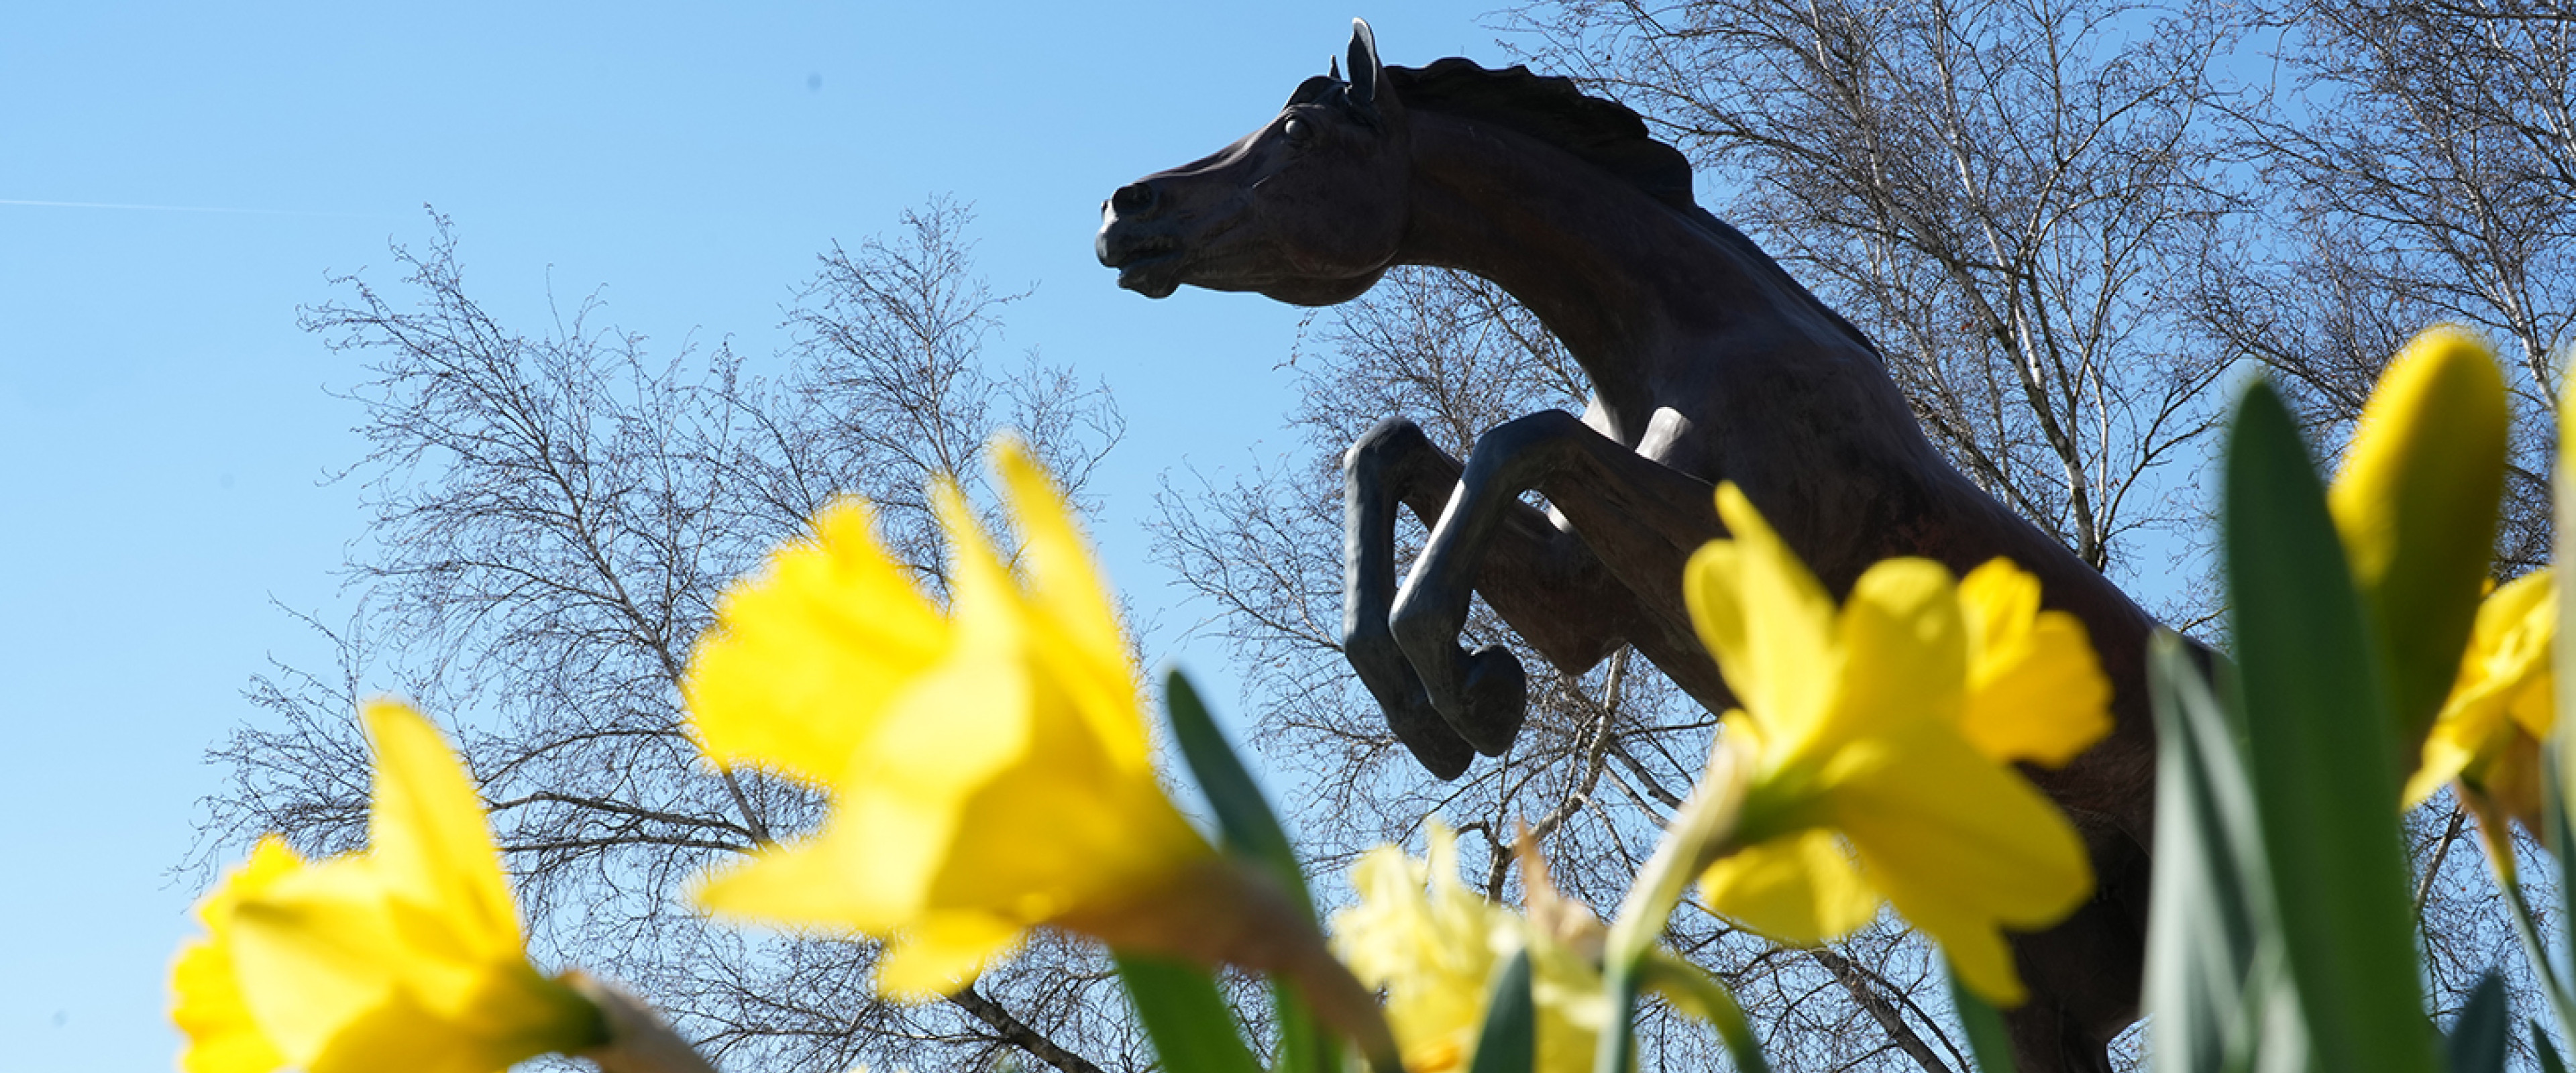 Photo of Bronco statue on campus with daffodils in the foreground